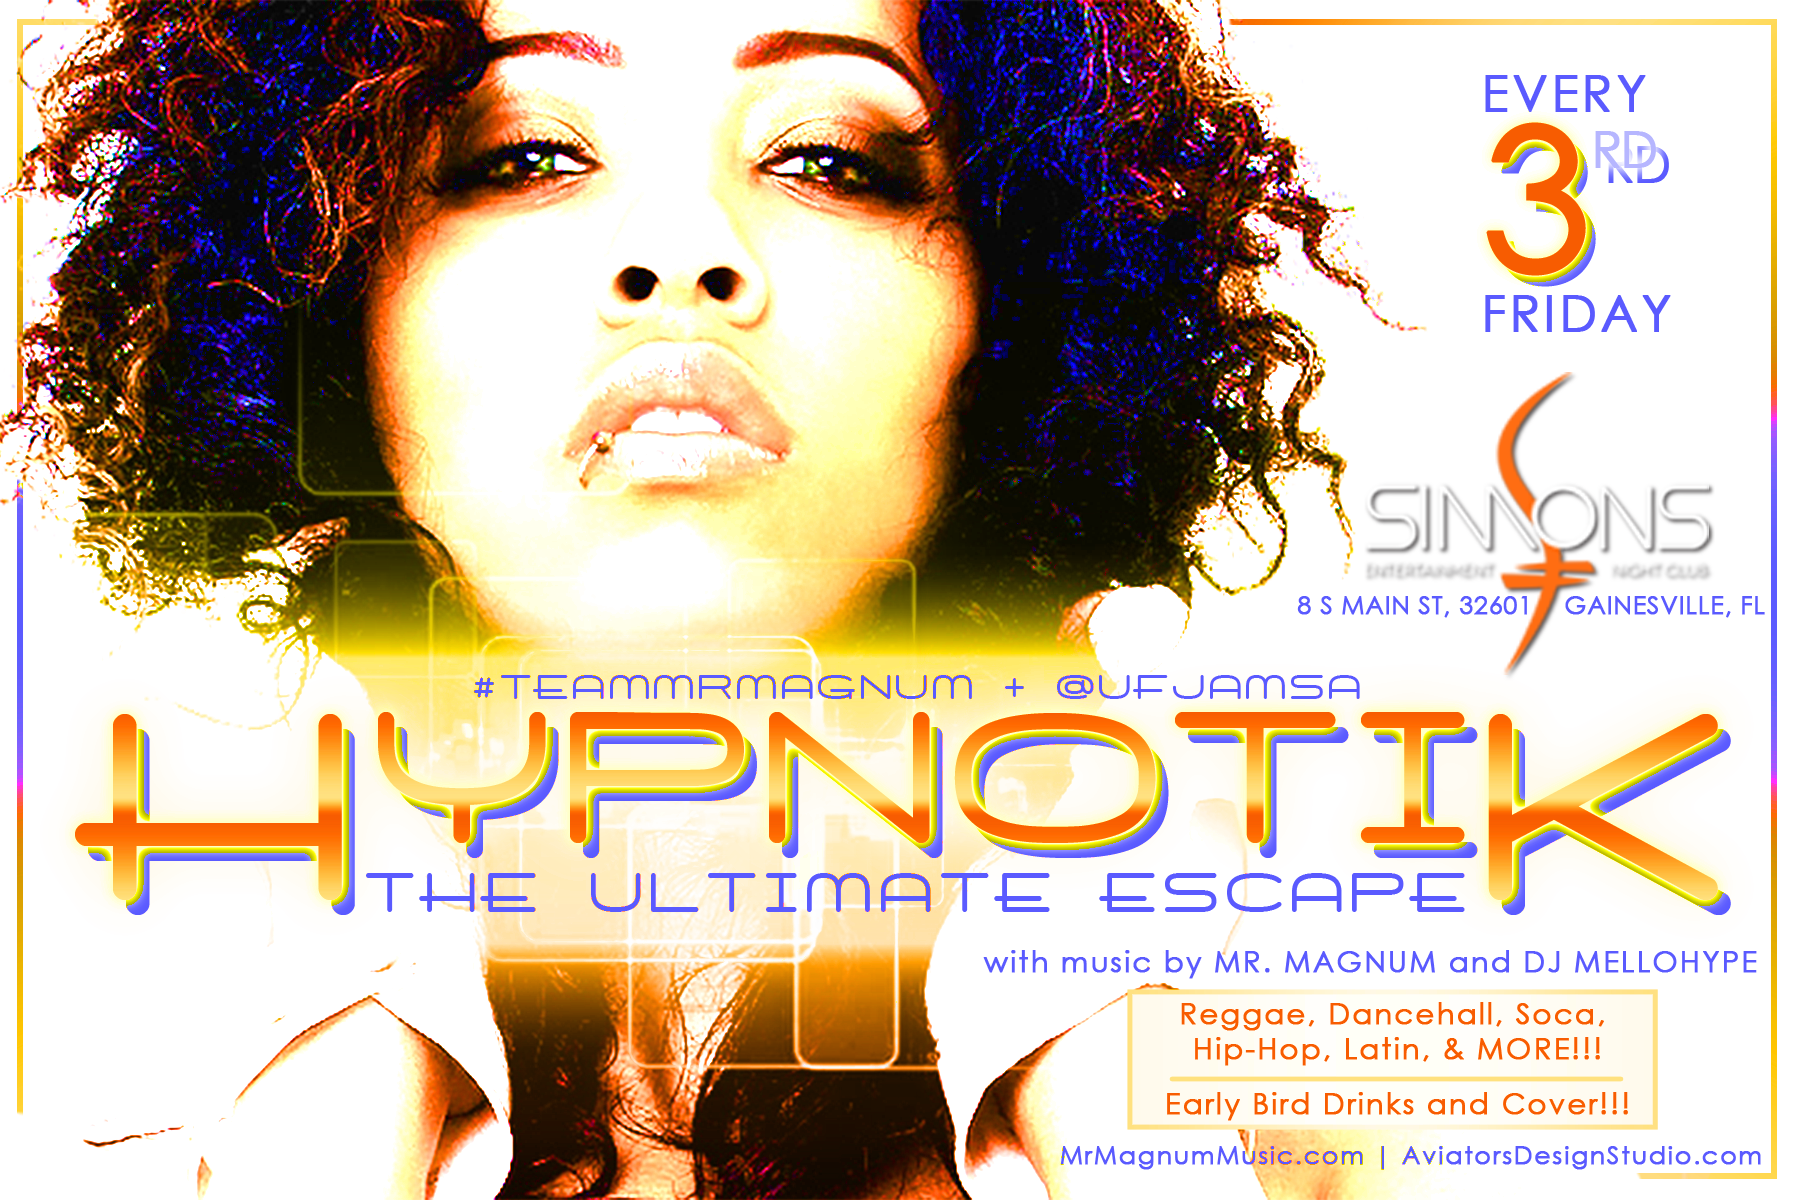 Gainesville - Hypnotik - The Ultimate Escape with UF Jamsa and your favourite DJ, Mr. Magnum